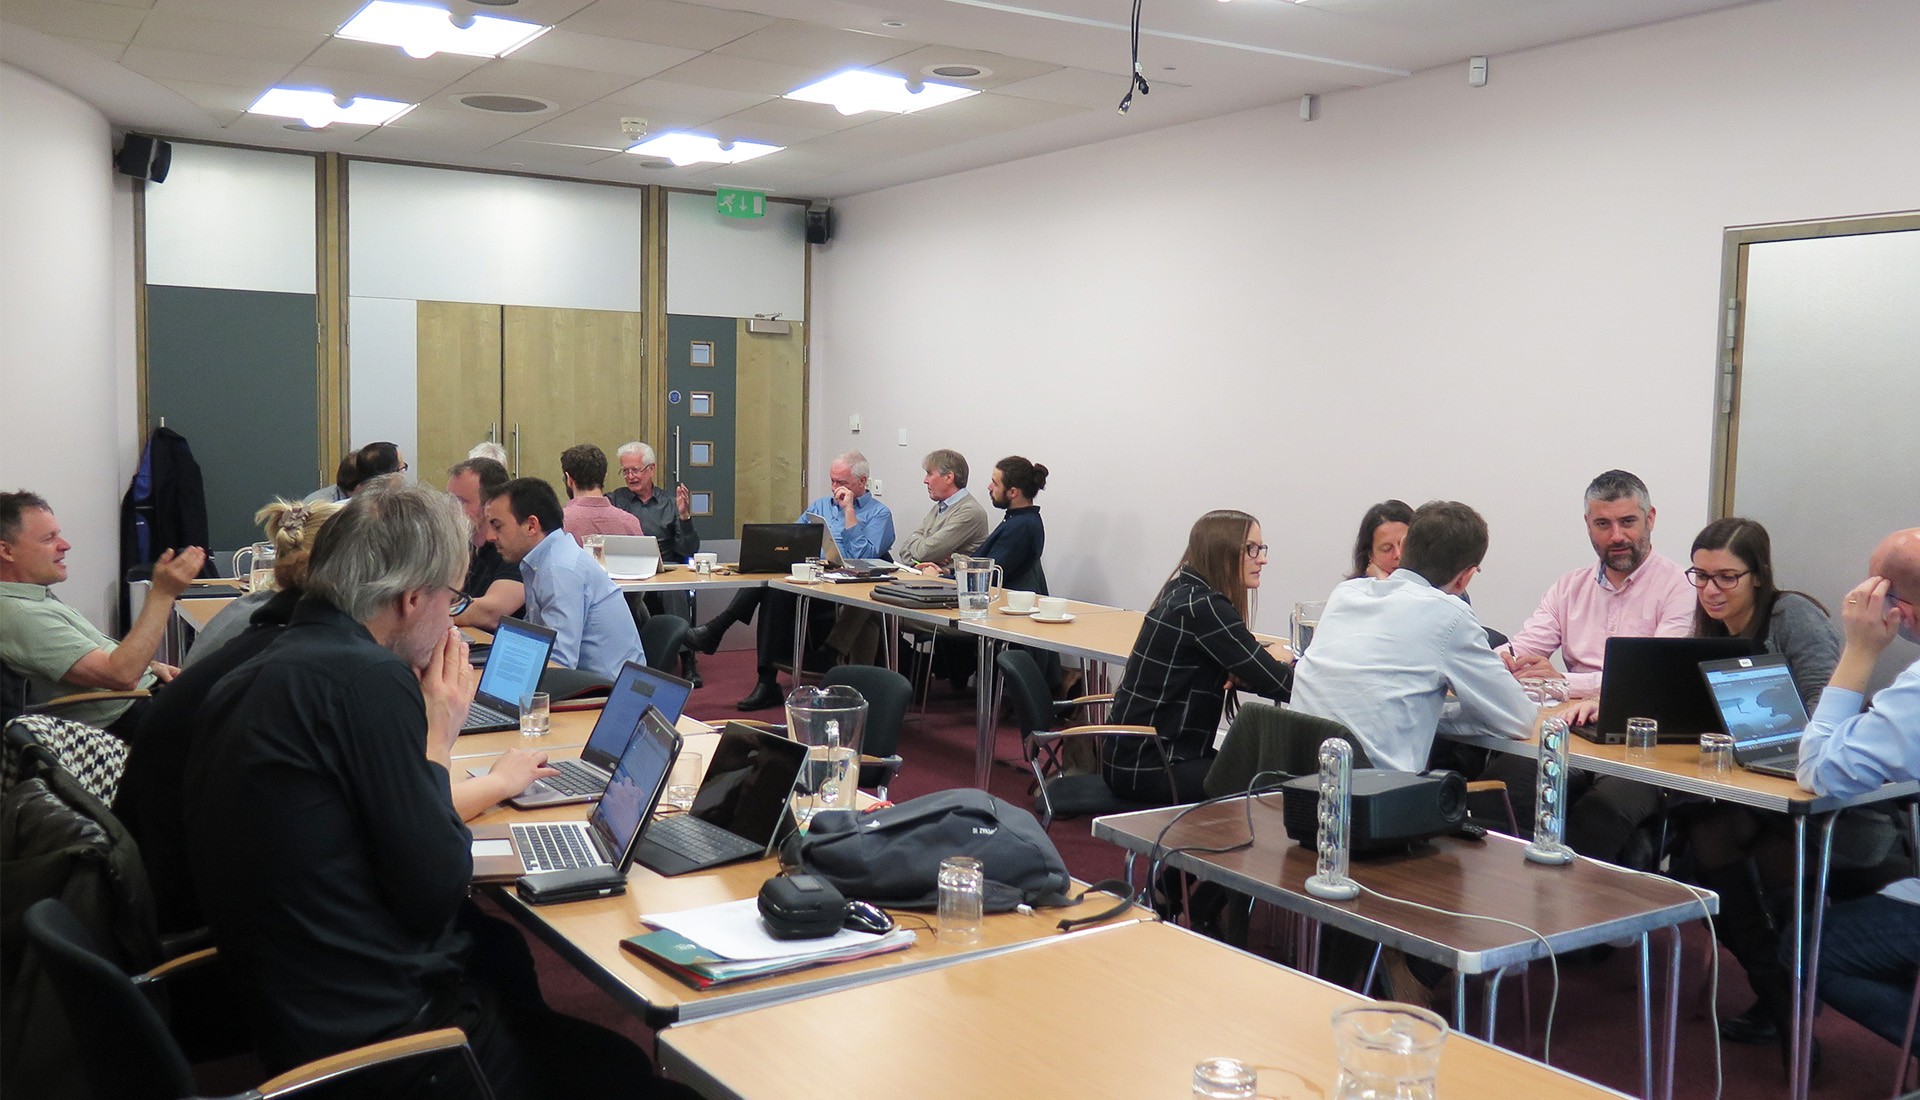 cambridge-hosted-the-4th-physical-meeting-of-feedback